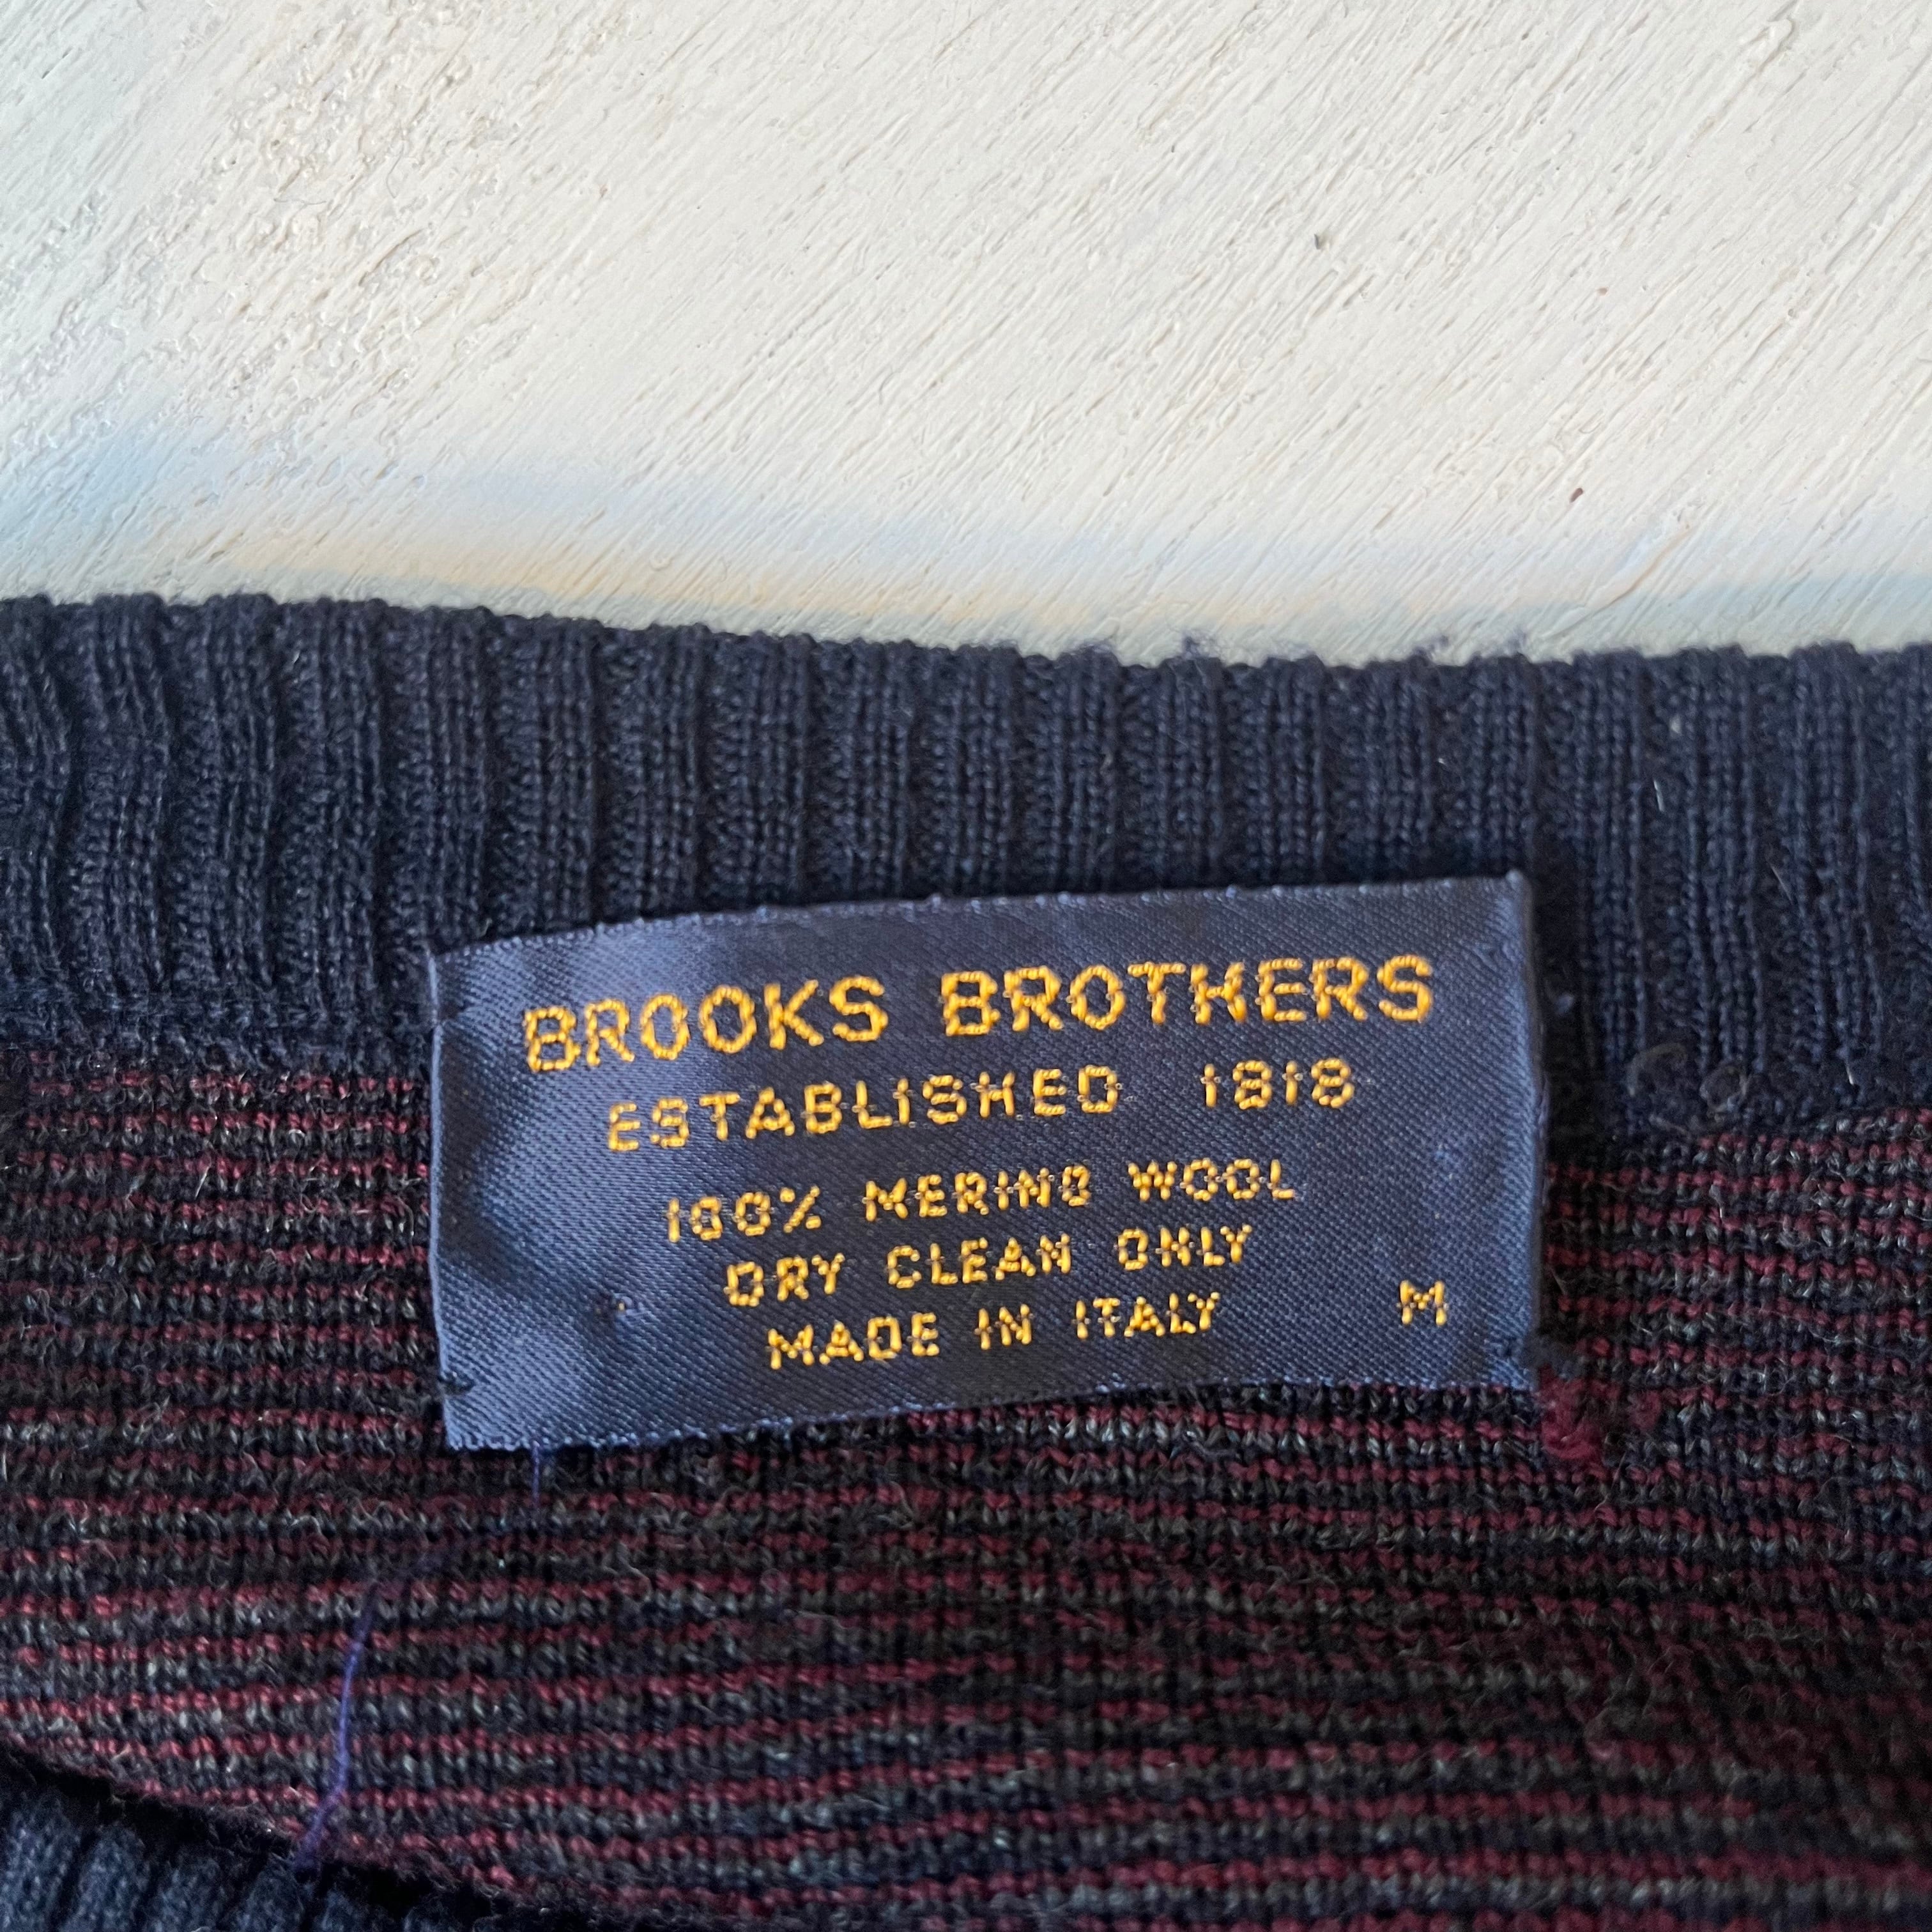 80s MADE IN ITALY BROOKS BROTHERS MERINO WOOL KNIT SWEATER Restairs